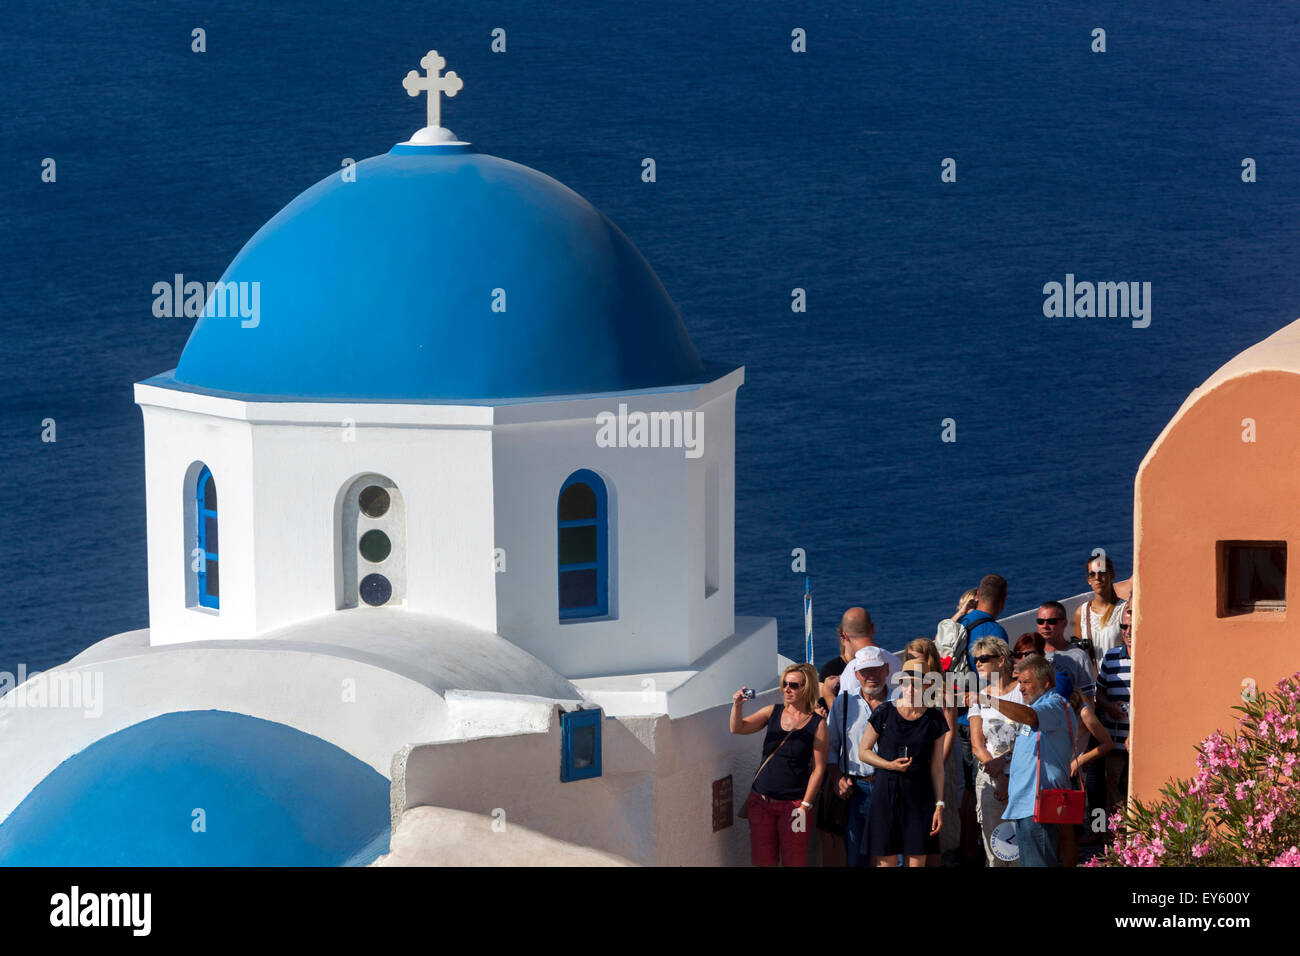 People, Tourists in Oia village street at blue dome church, Santorini, Cyclades Islands, Greek Islands, Greece, Europe Stock Photo